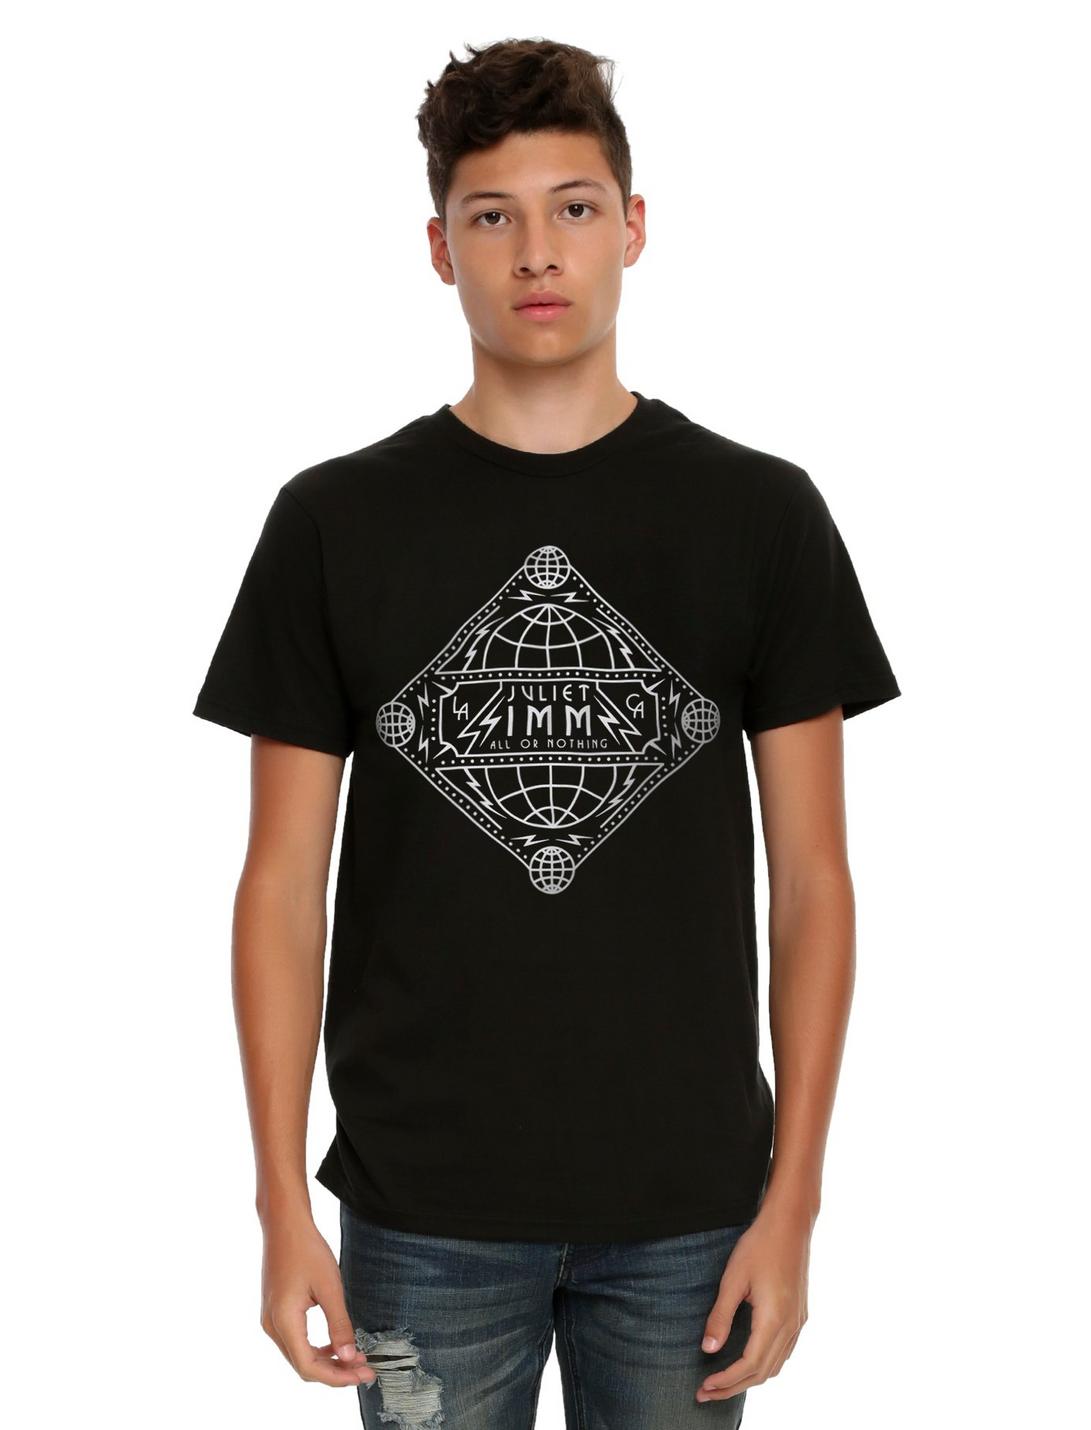 Juliet Simms All Or Nothing T-Shirt, BLACK, hi-res